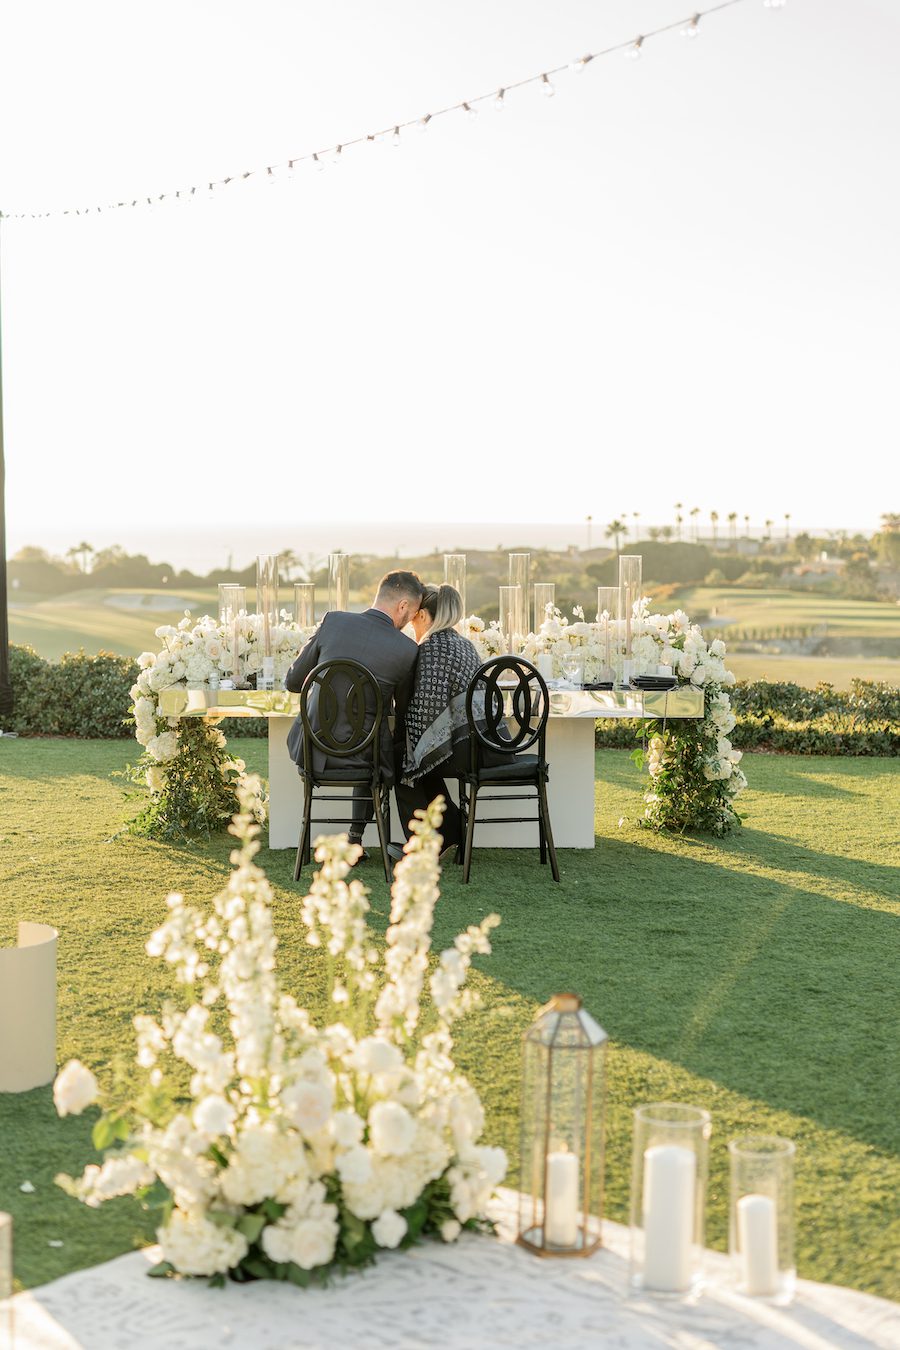 Romantic setting during this luxury 20 year anniversary and ocean view proposal in southern California